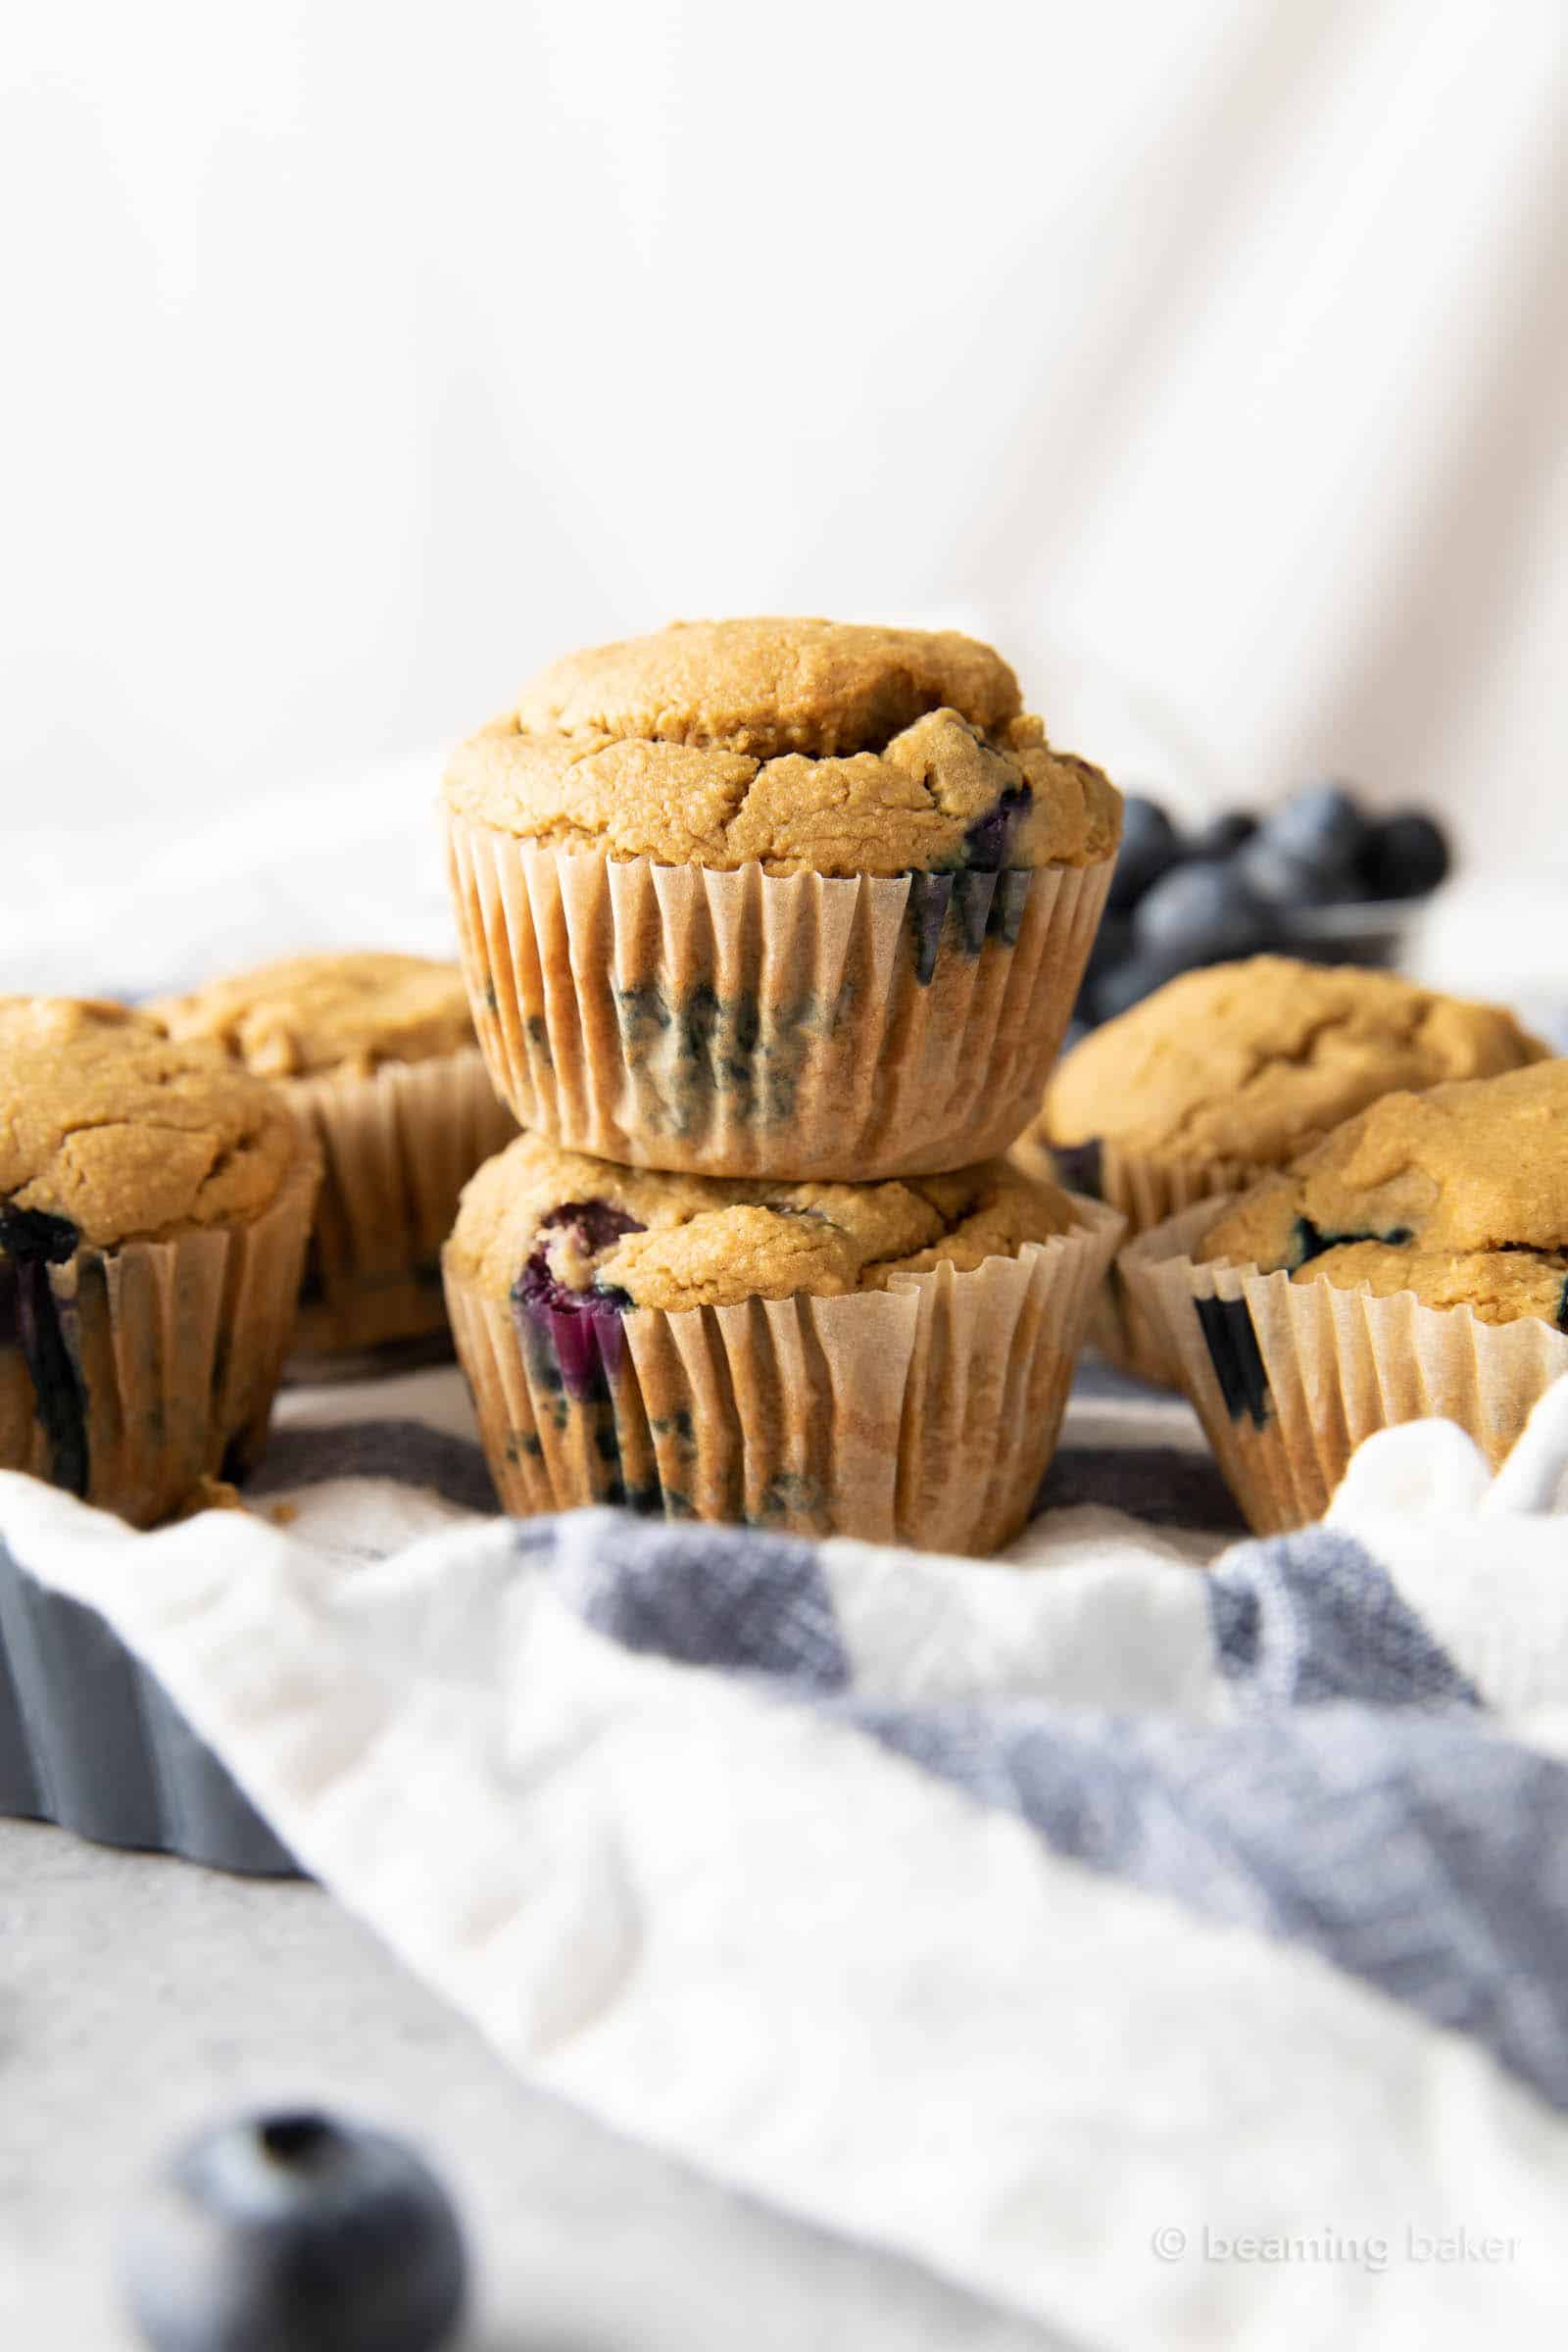 Two oatmeal flour blueberry muffins stacked on each other with more muffins around them